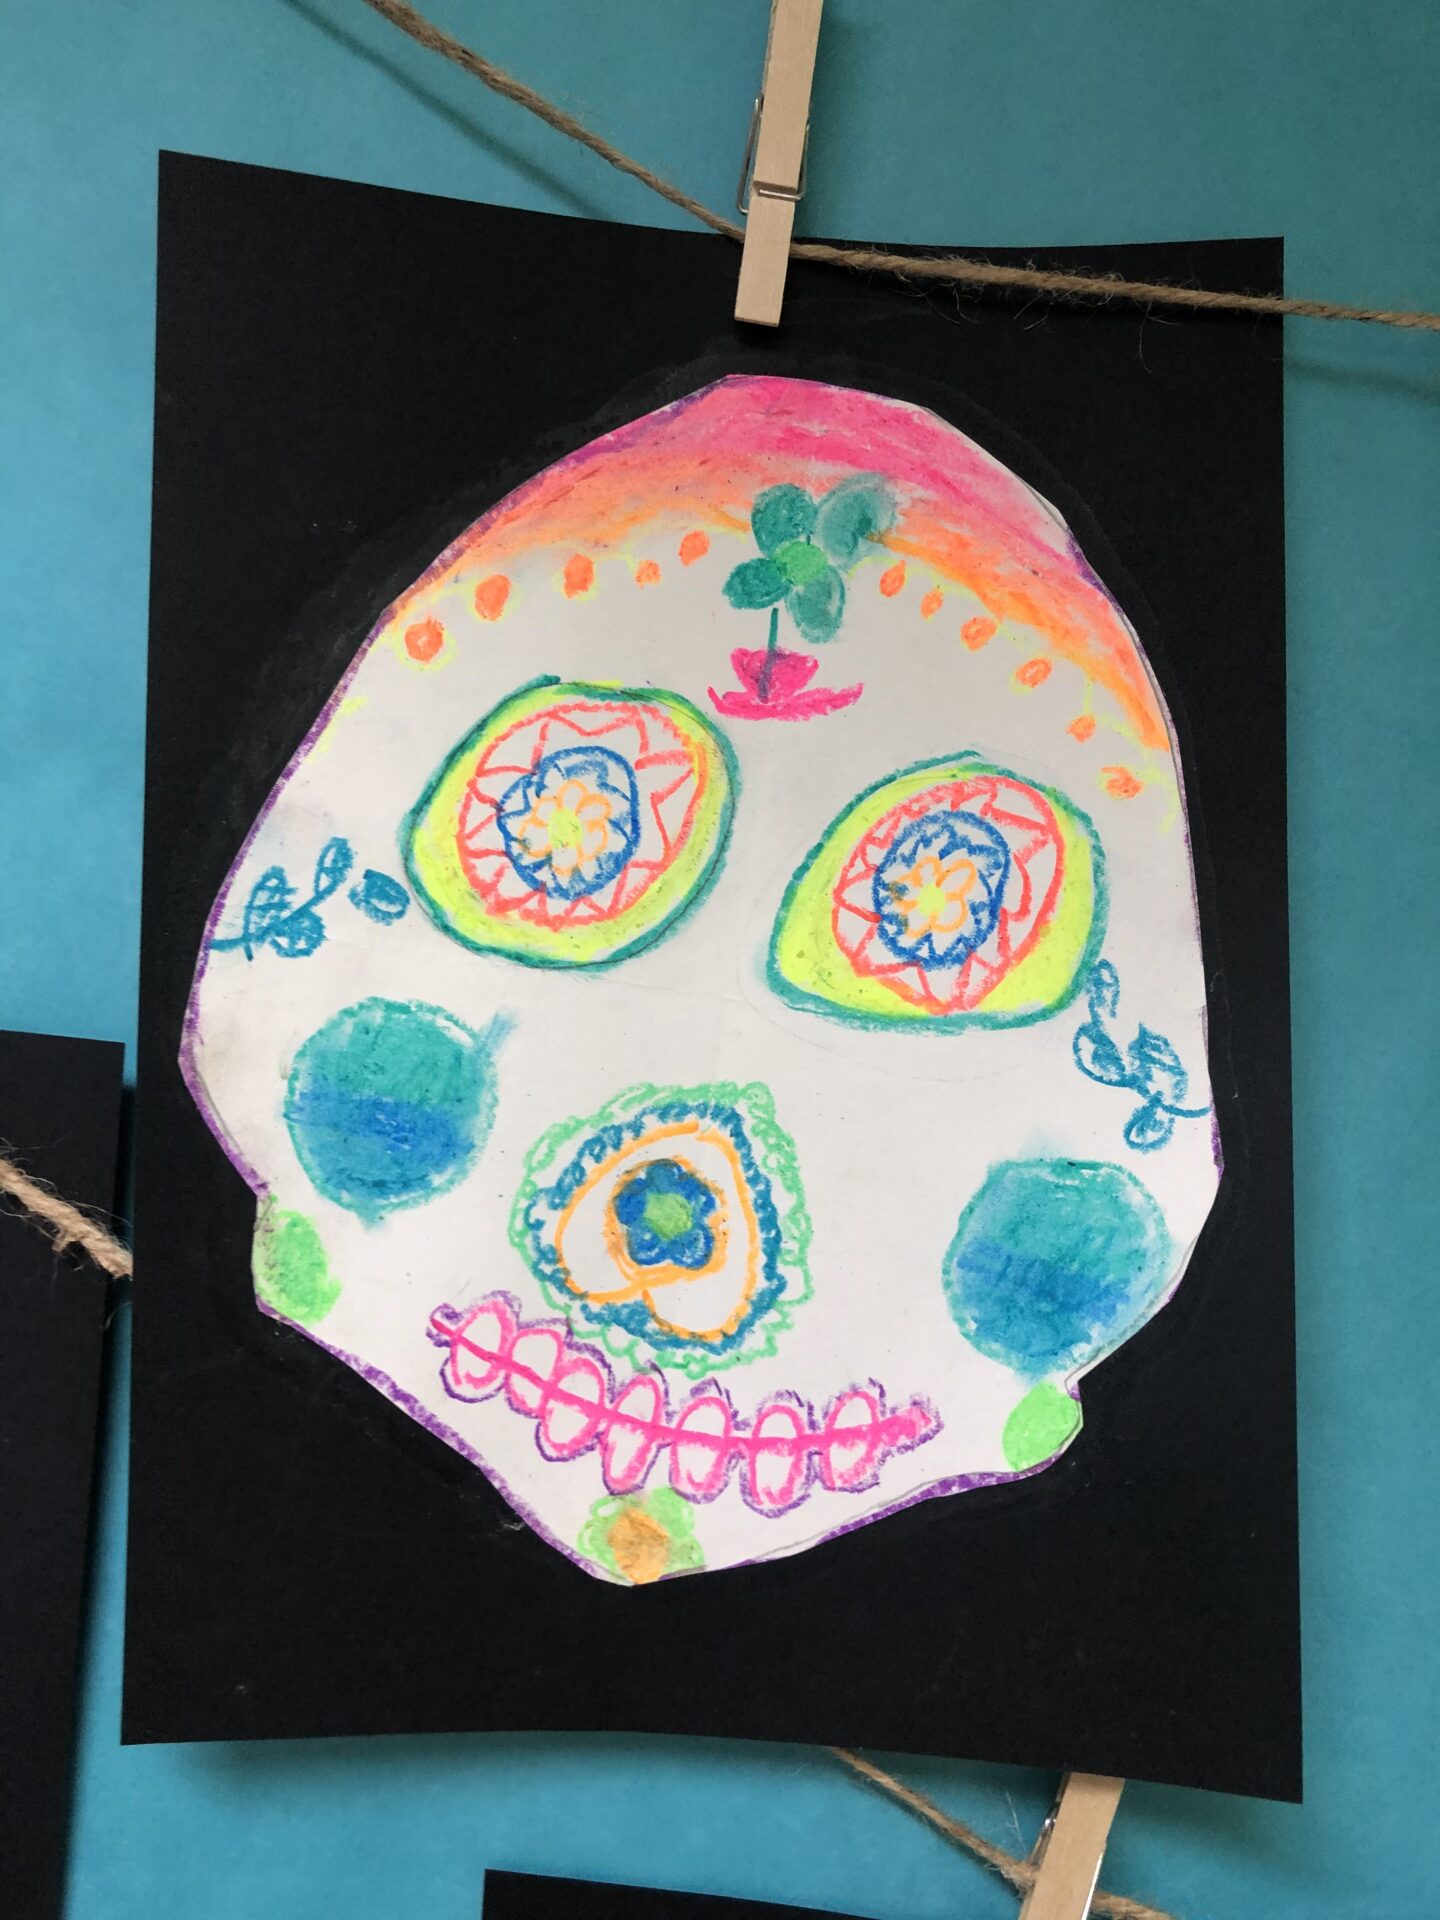 Neon Sugar Skulls - created by students from Grade 3